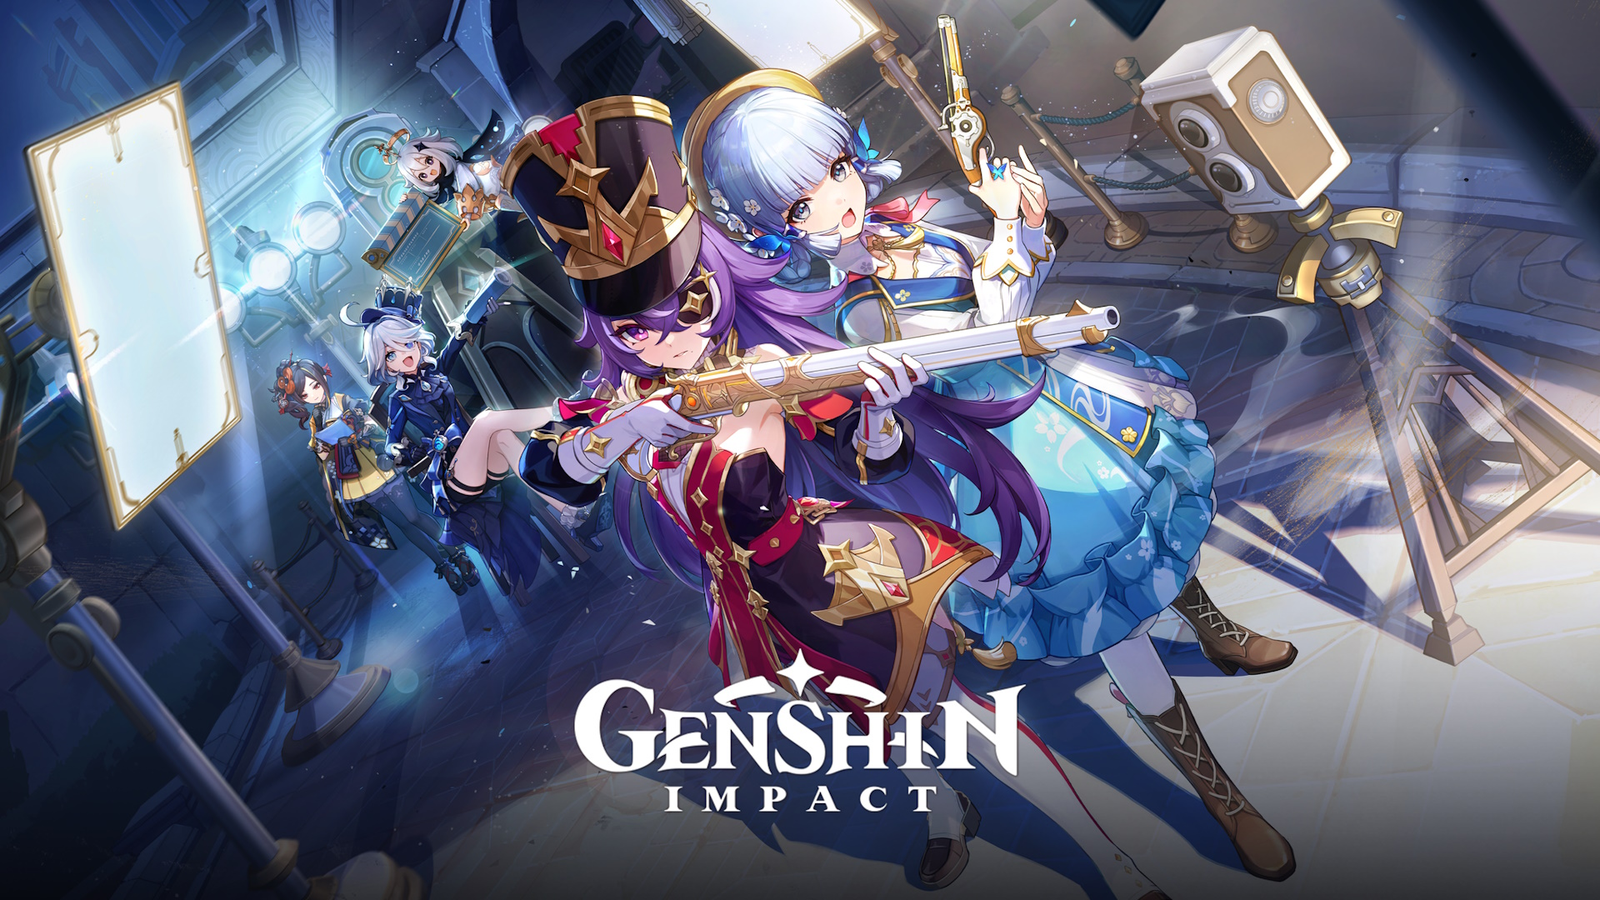 Genshin Impact Version 4.0 Character Topic Event – Take Part to